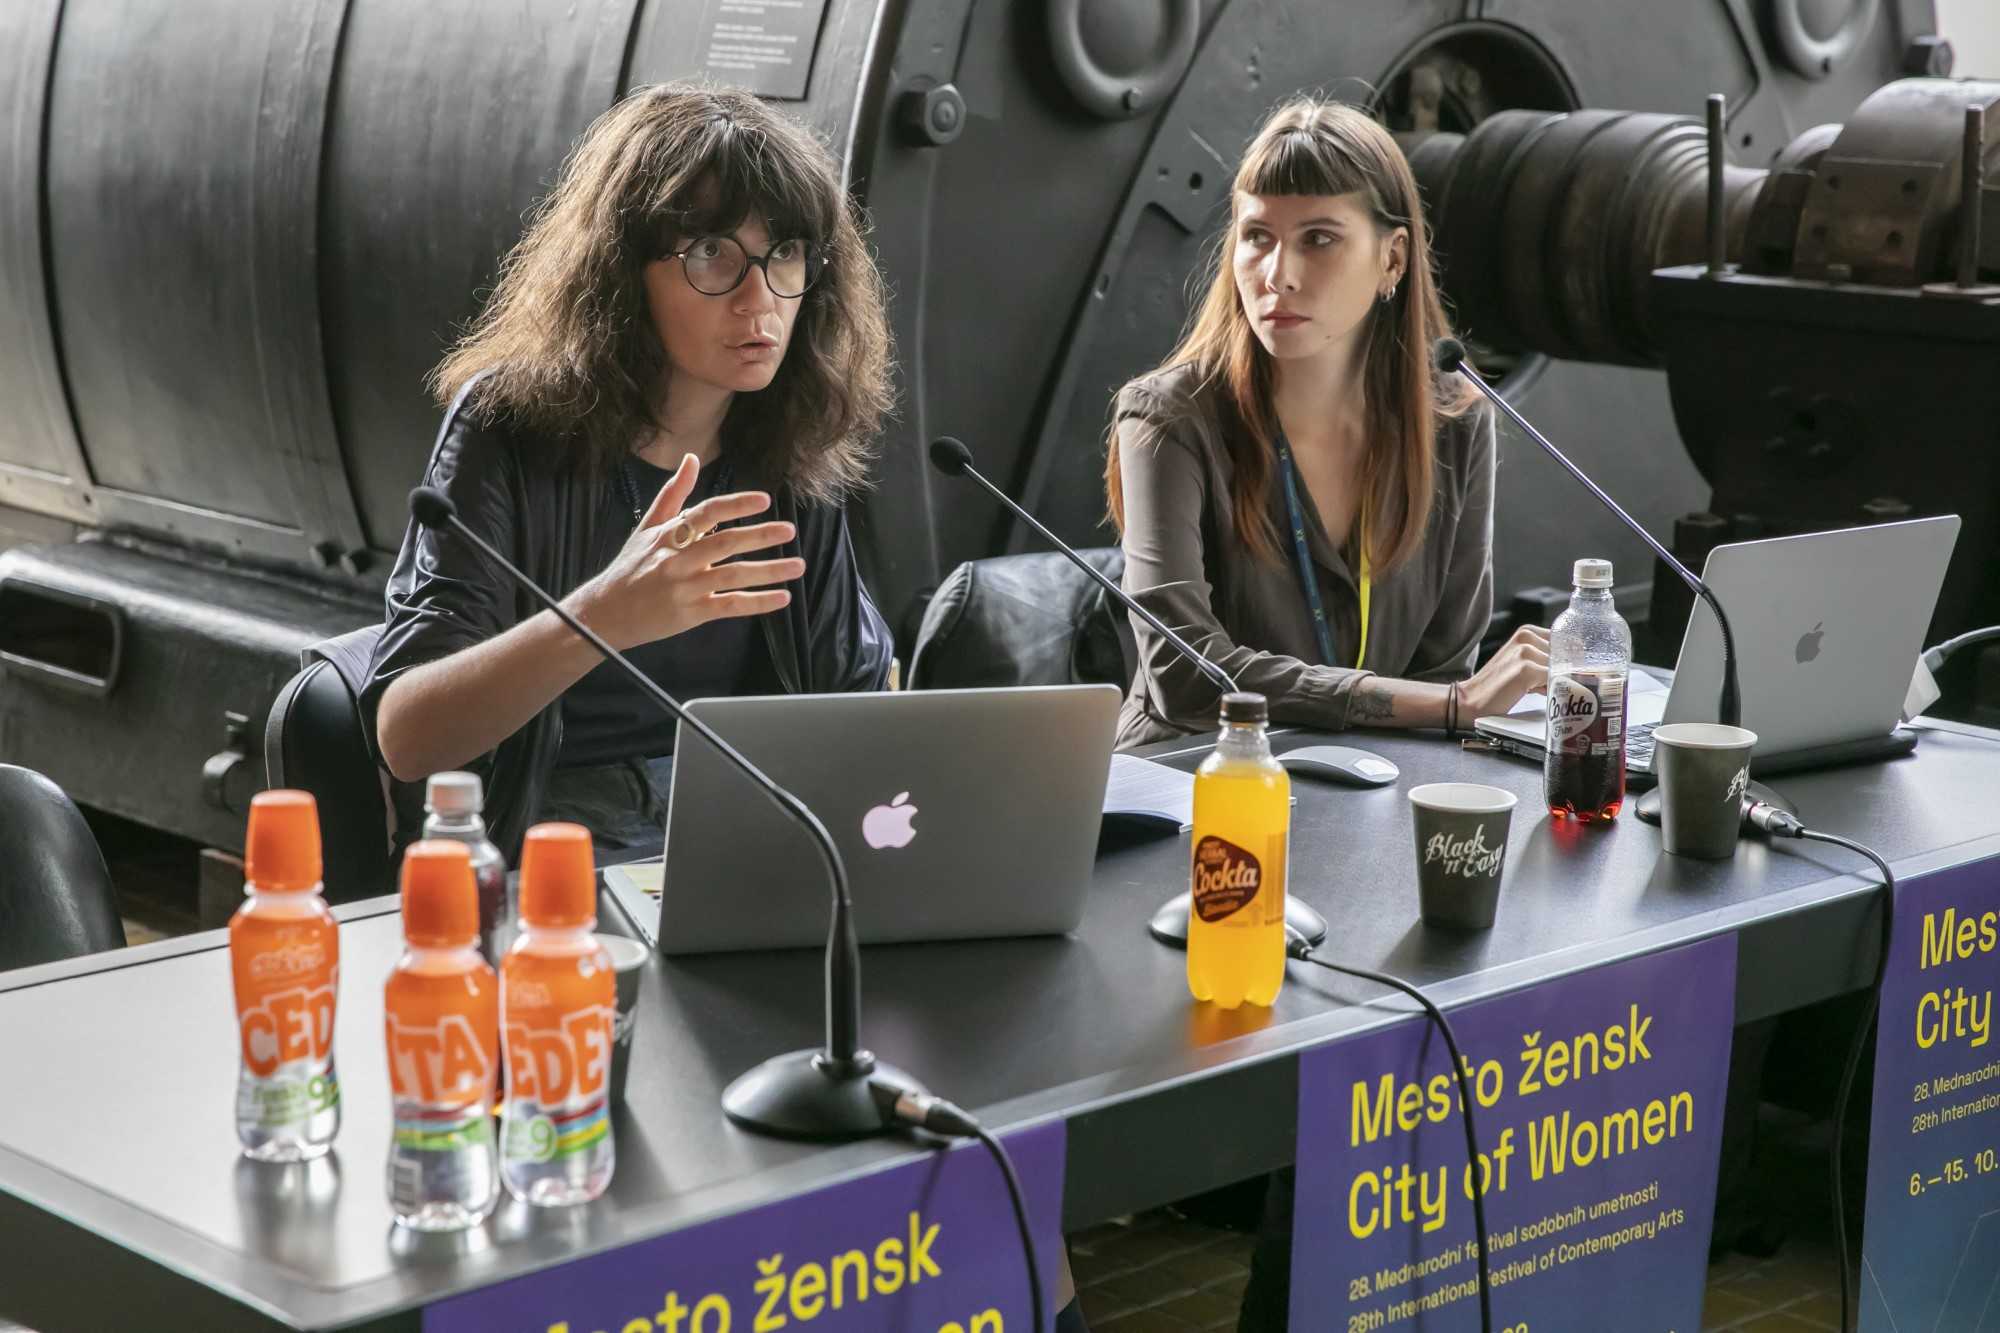 Iva Kovač (left) Program Director of the City of Women festival and the curator of the exhibition The South in Us, 2022.